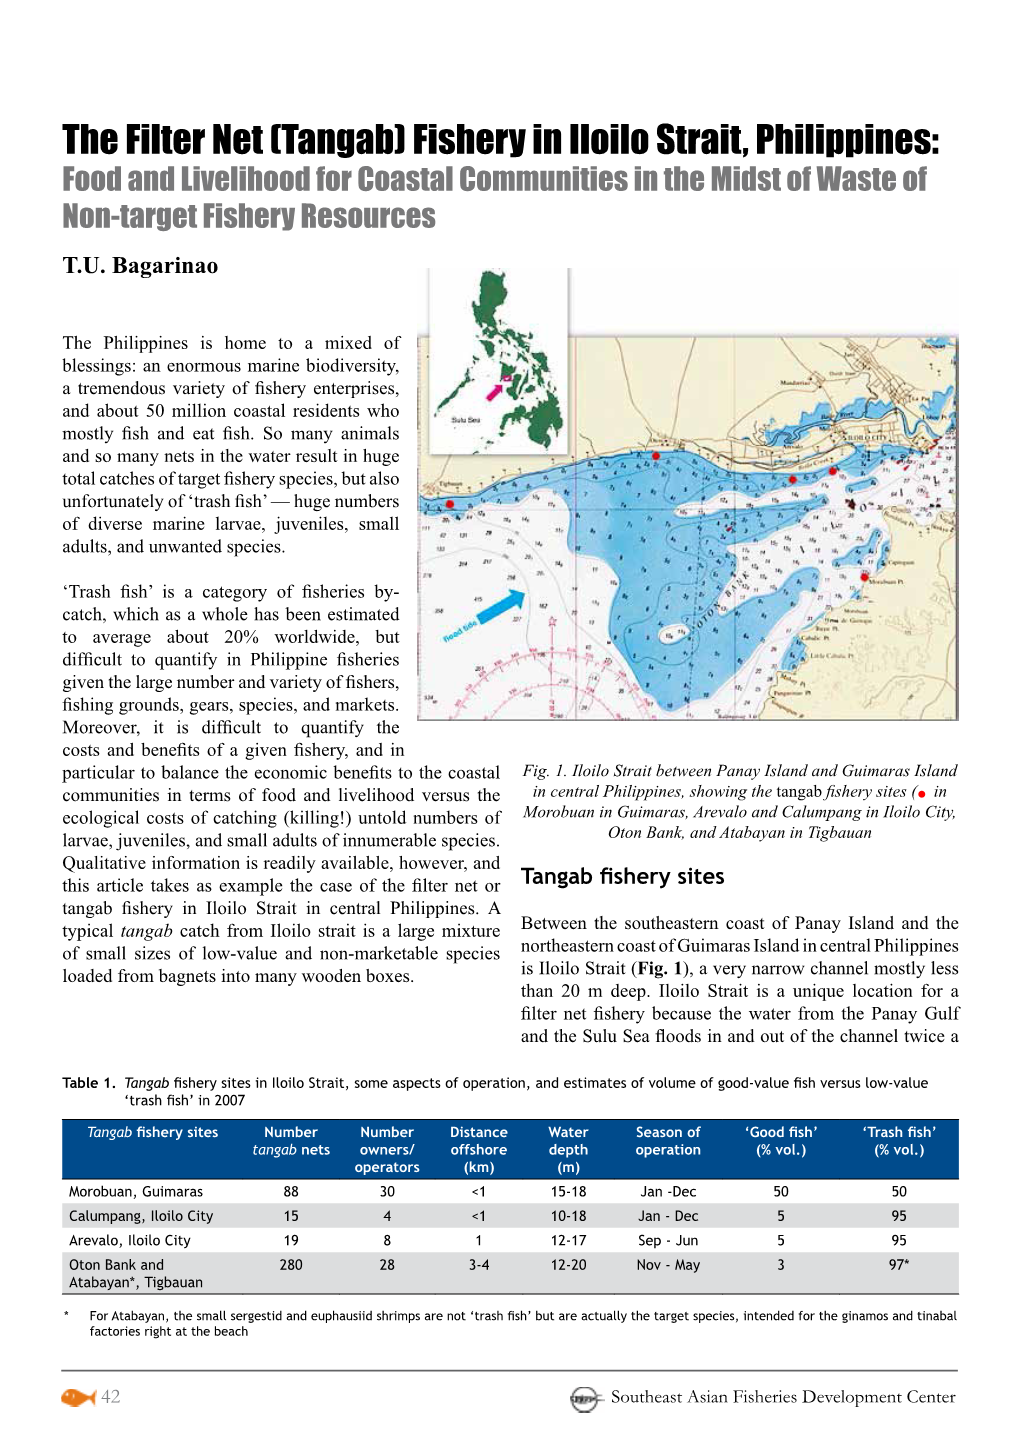 Fishery in Iloilo Strait, Philippines: Food and Livelihood for Coastal Communities in the Midst of Waste of Non-Target Fishery Resources T.U